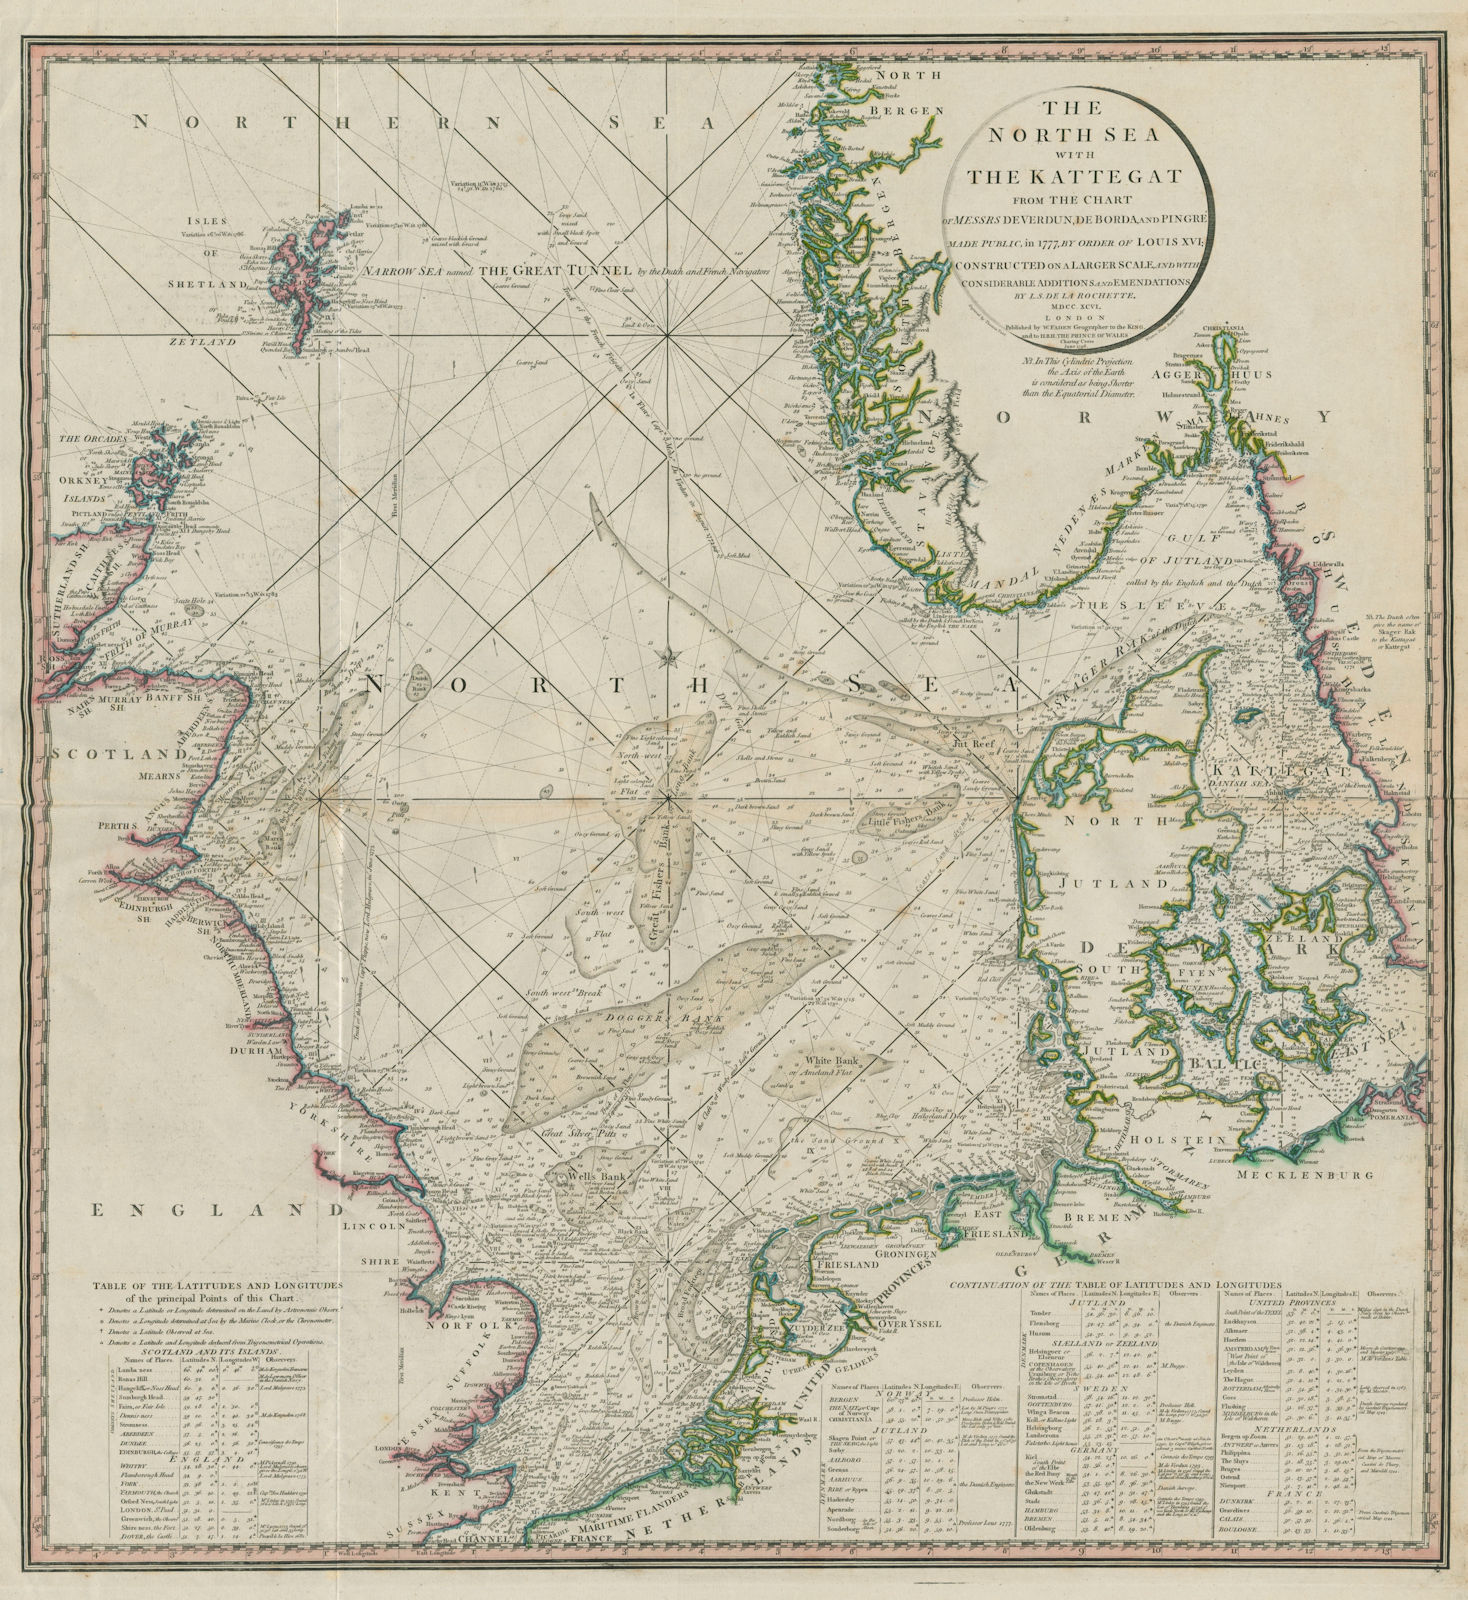 Associate Product The North Sea with the Kattegat. Soundings. DELAROCHETTE / FADEN 1791 old map